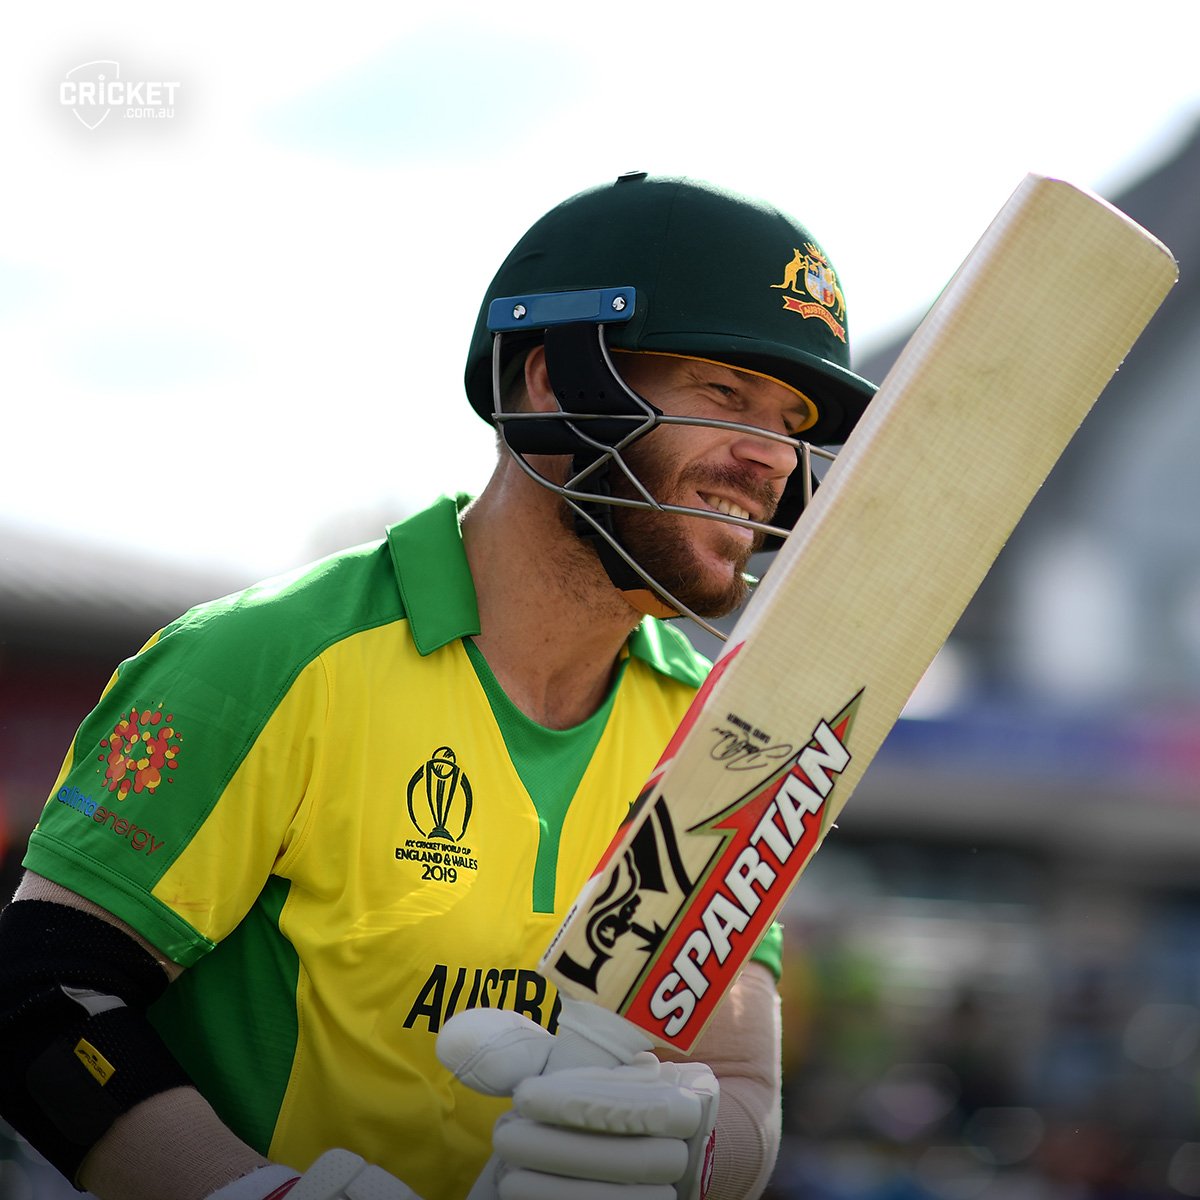 CWC'19: English crowd continue to give hostile reception to David Warner